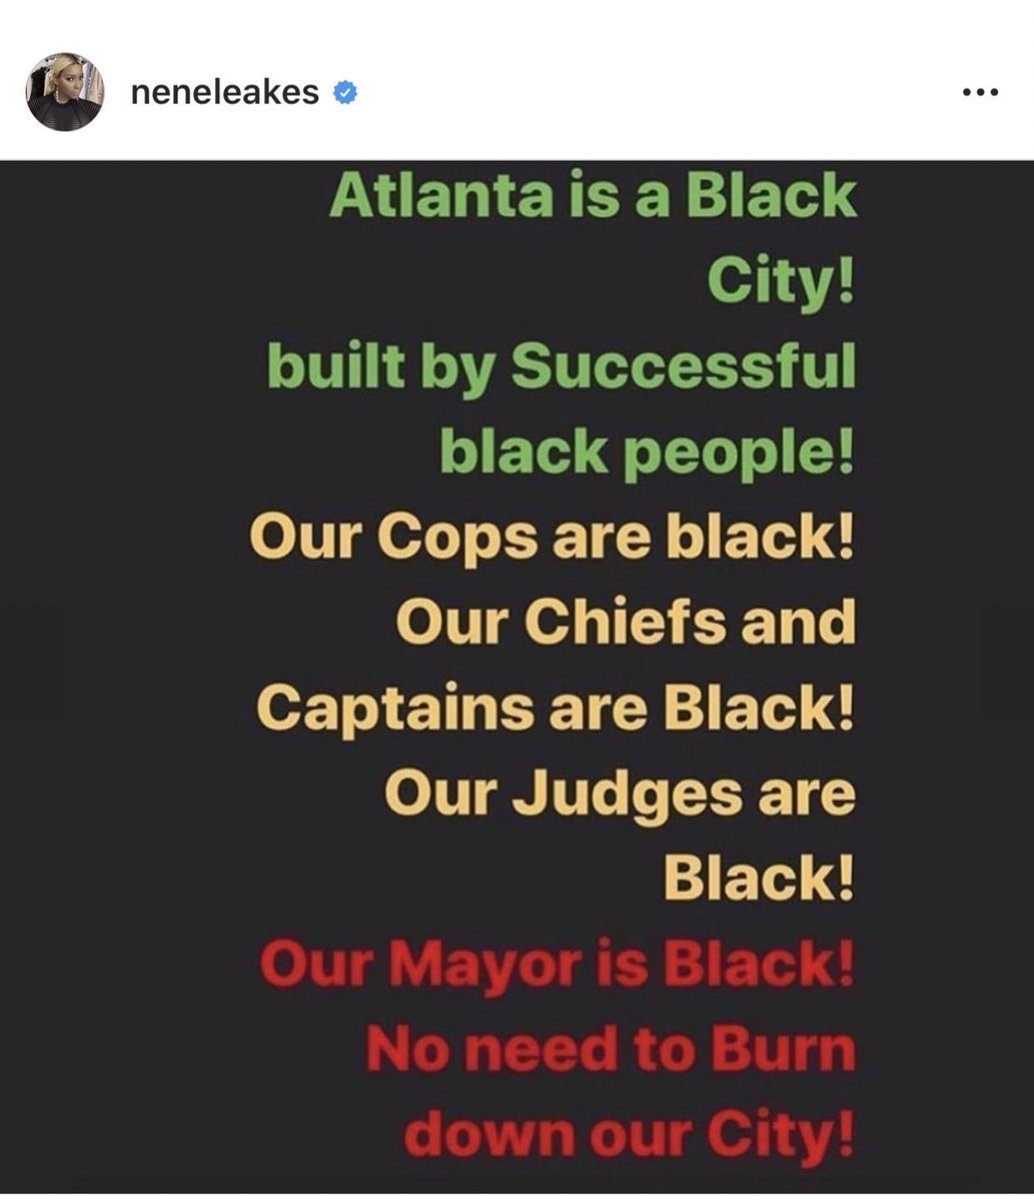 Nene Leakes This has been the only thing she’s said. :( Why isn’t she out there peacefully protesting? Is that pocket book open? Racism doesn’t exist in ATL at all Nene? Two BLACK cops just snatched two black kids out of a car..........Got it